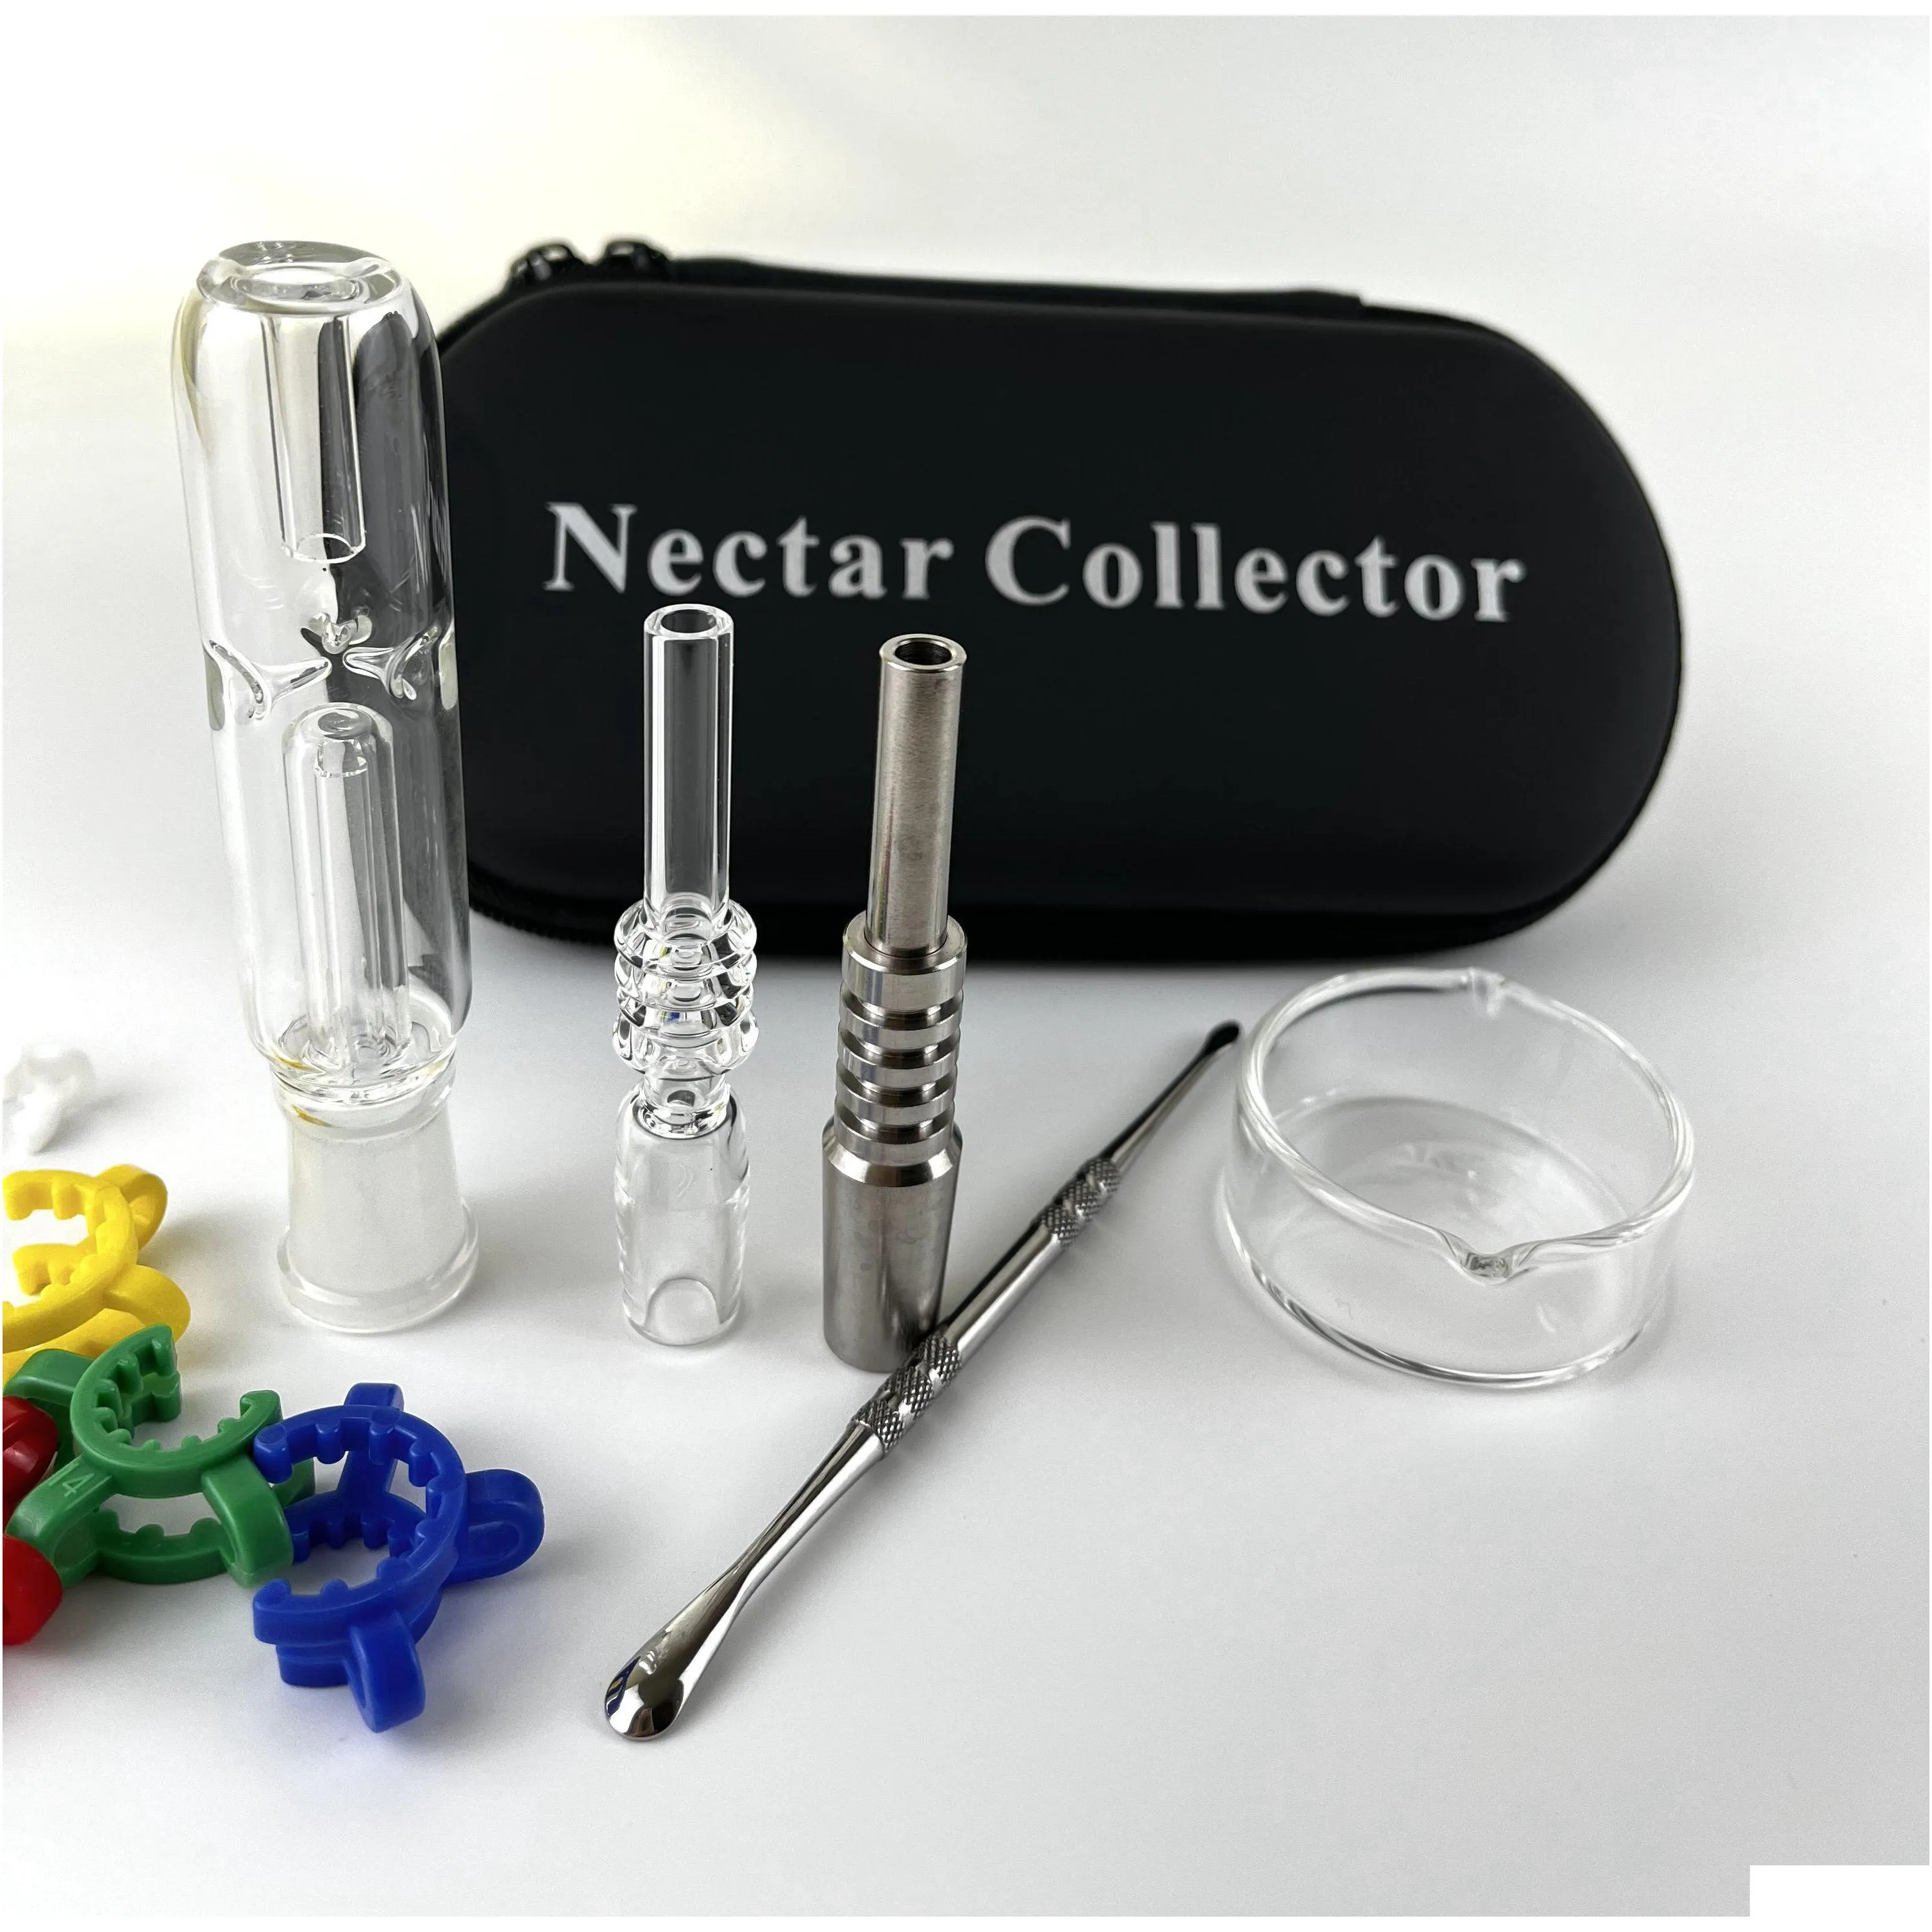 mini nectar collector kit glass pipes smoking nc set with 10mm 14mm titanium tip or quartz tips oil rig concentrate dab straw for glass bong